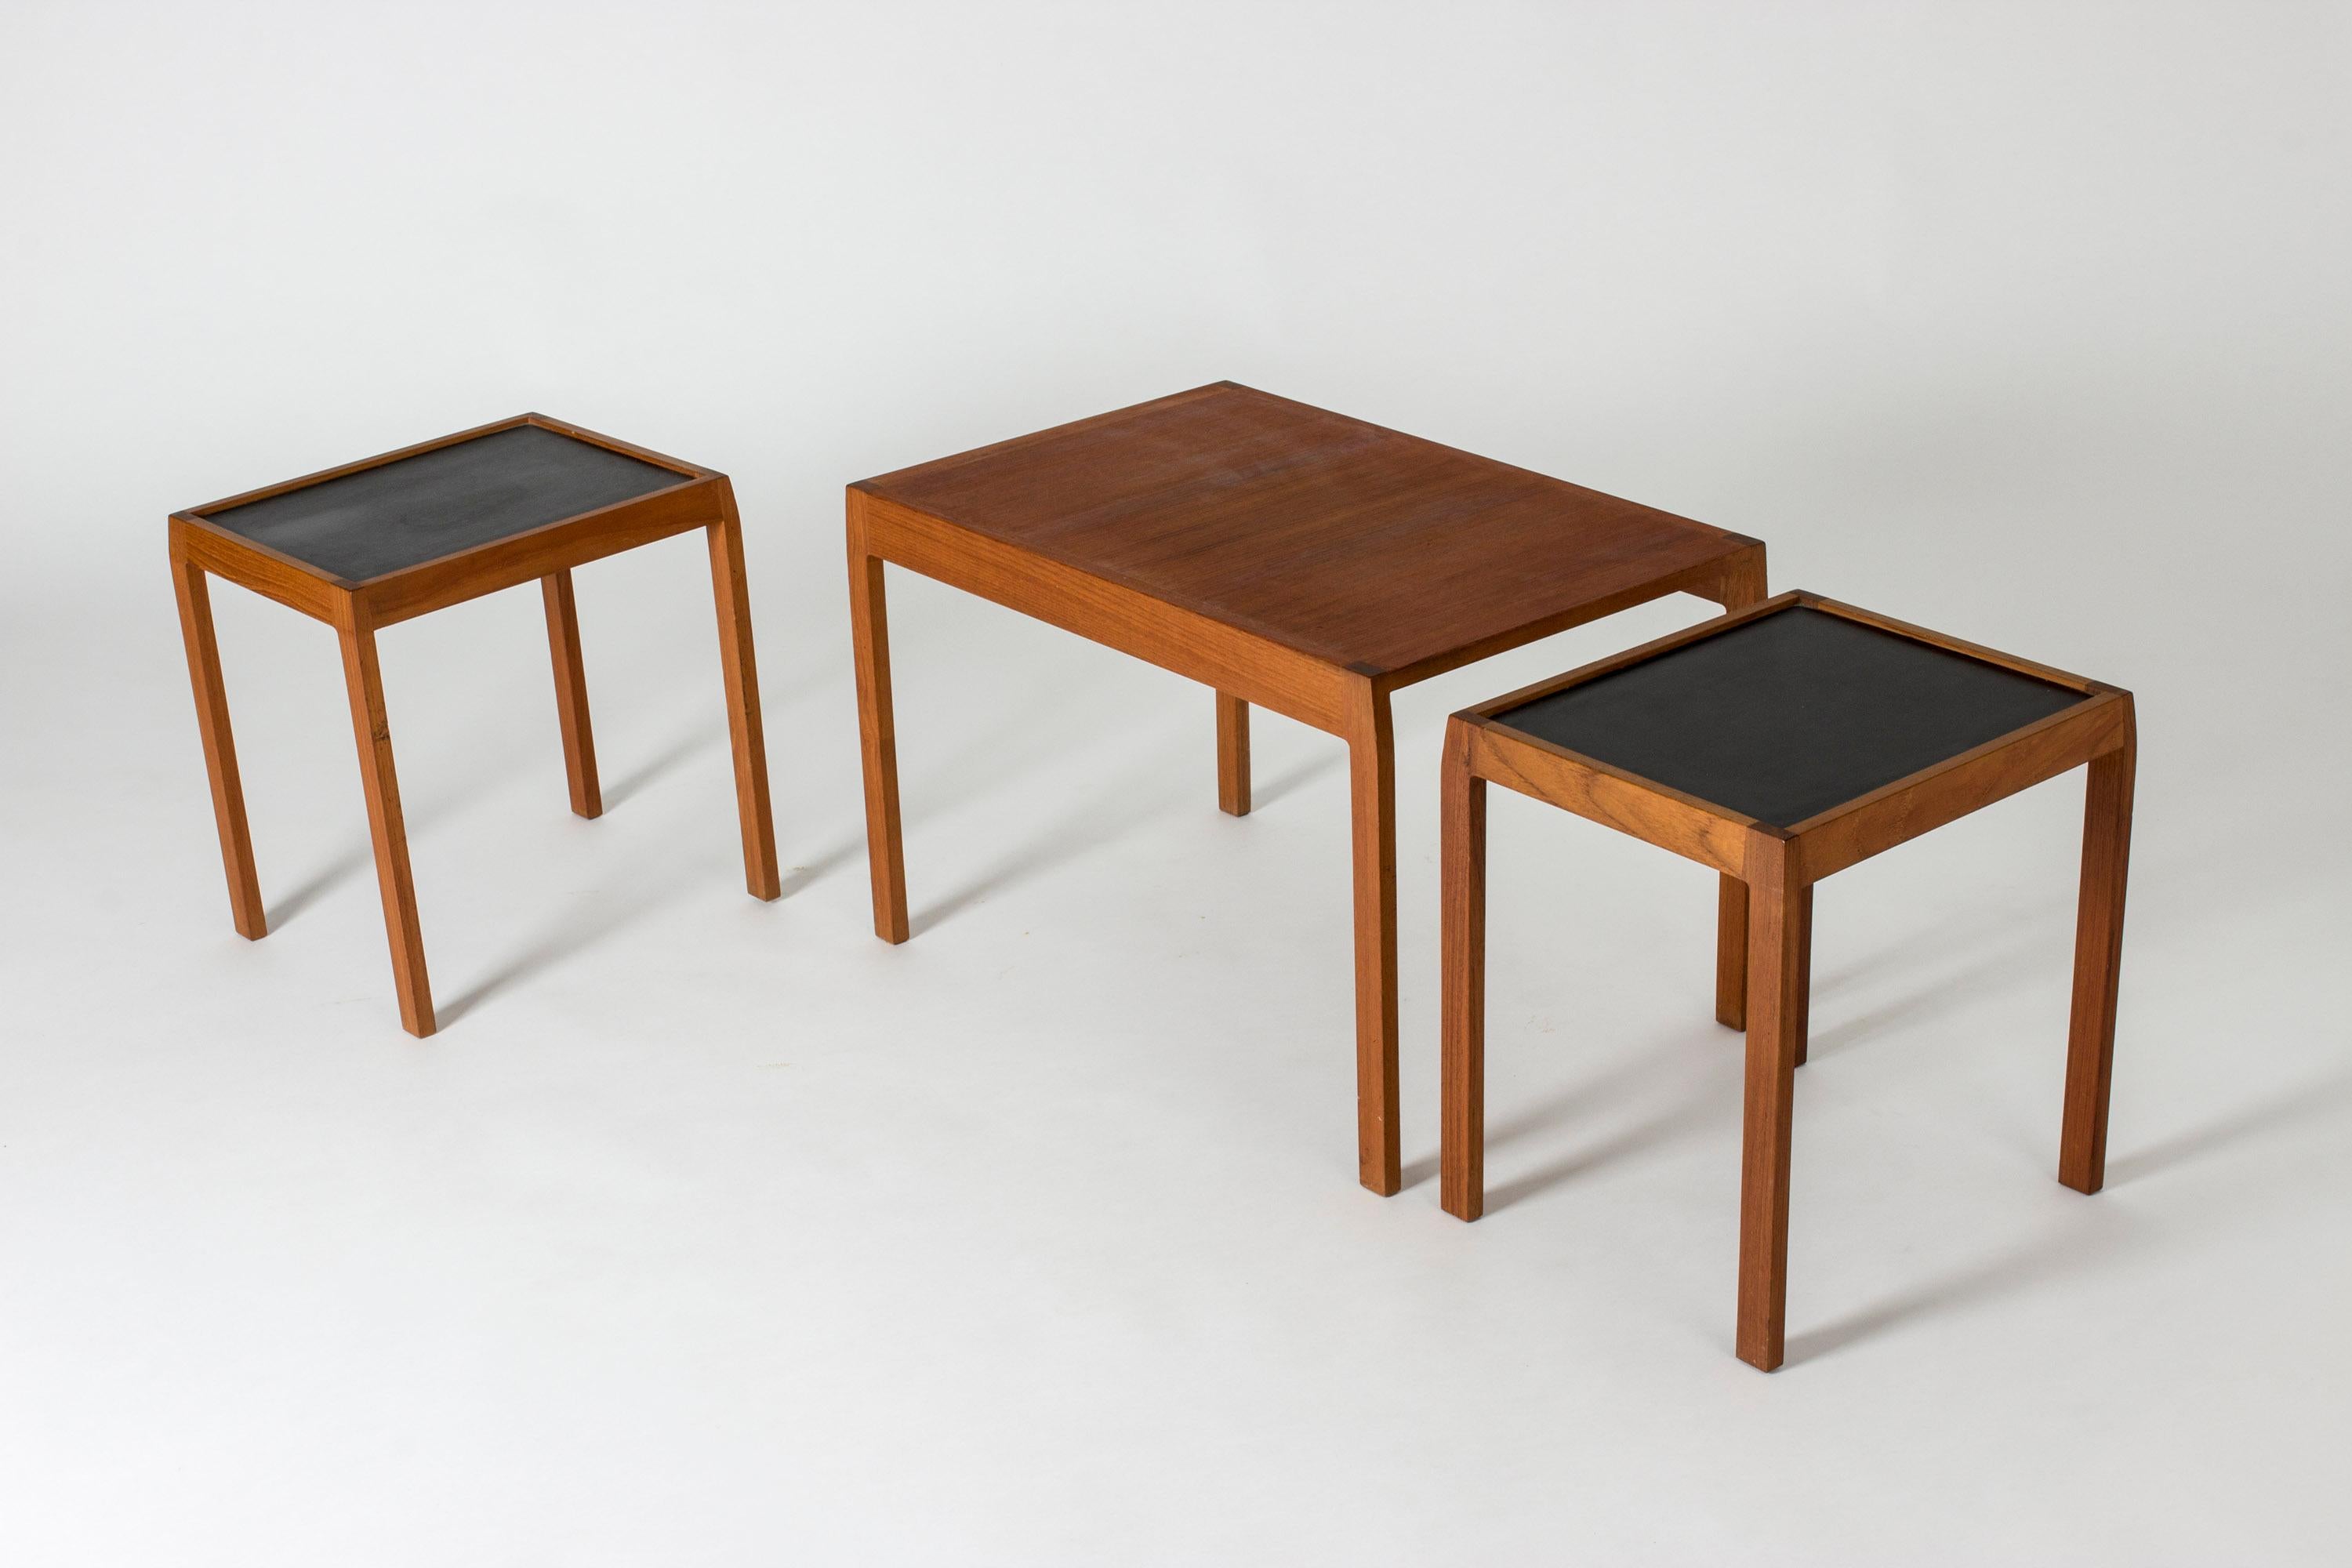 Neat nesting table by Svante Skogh, made from teak. Two smaller tables fit under the large one, both with formica table tops. Beautifully bevelled corners on the table tops make an interesting silhouette.